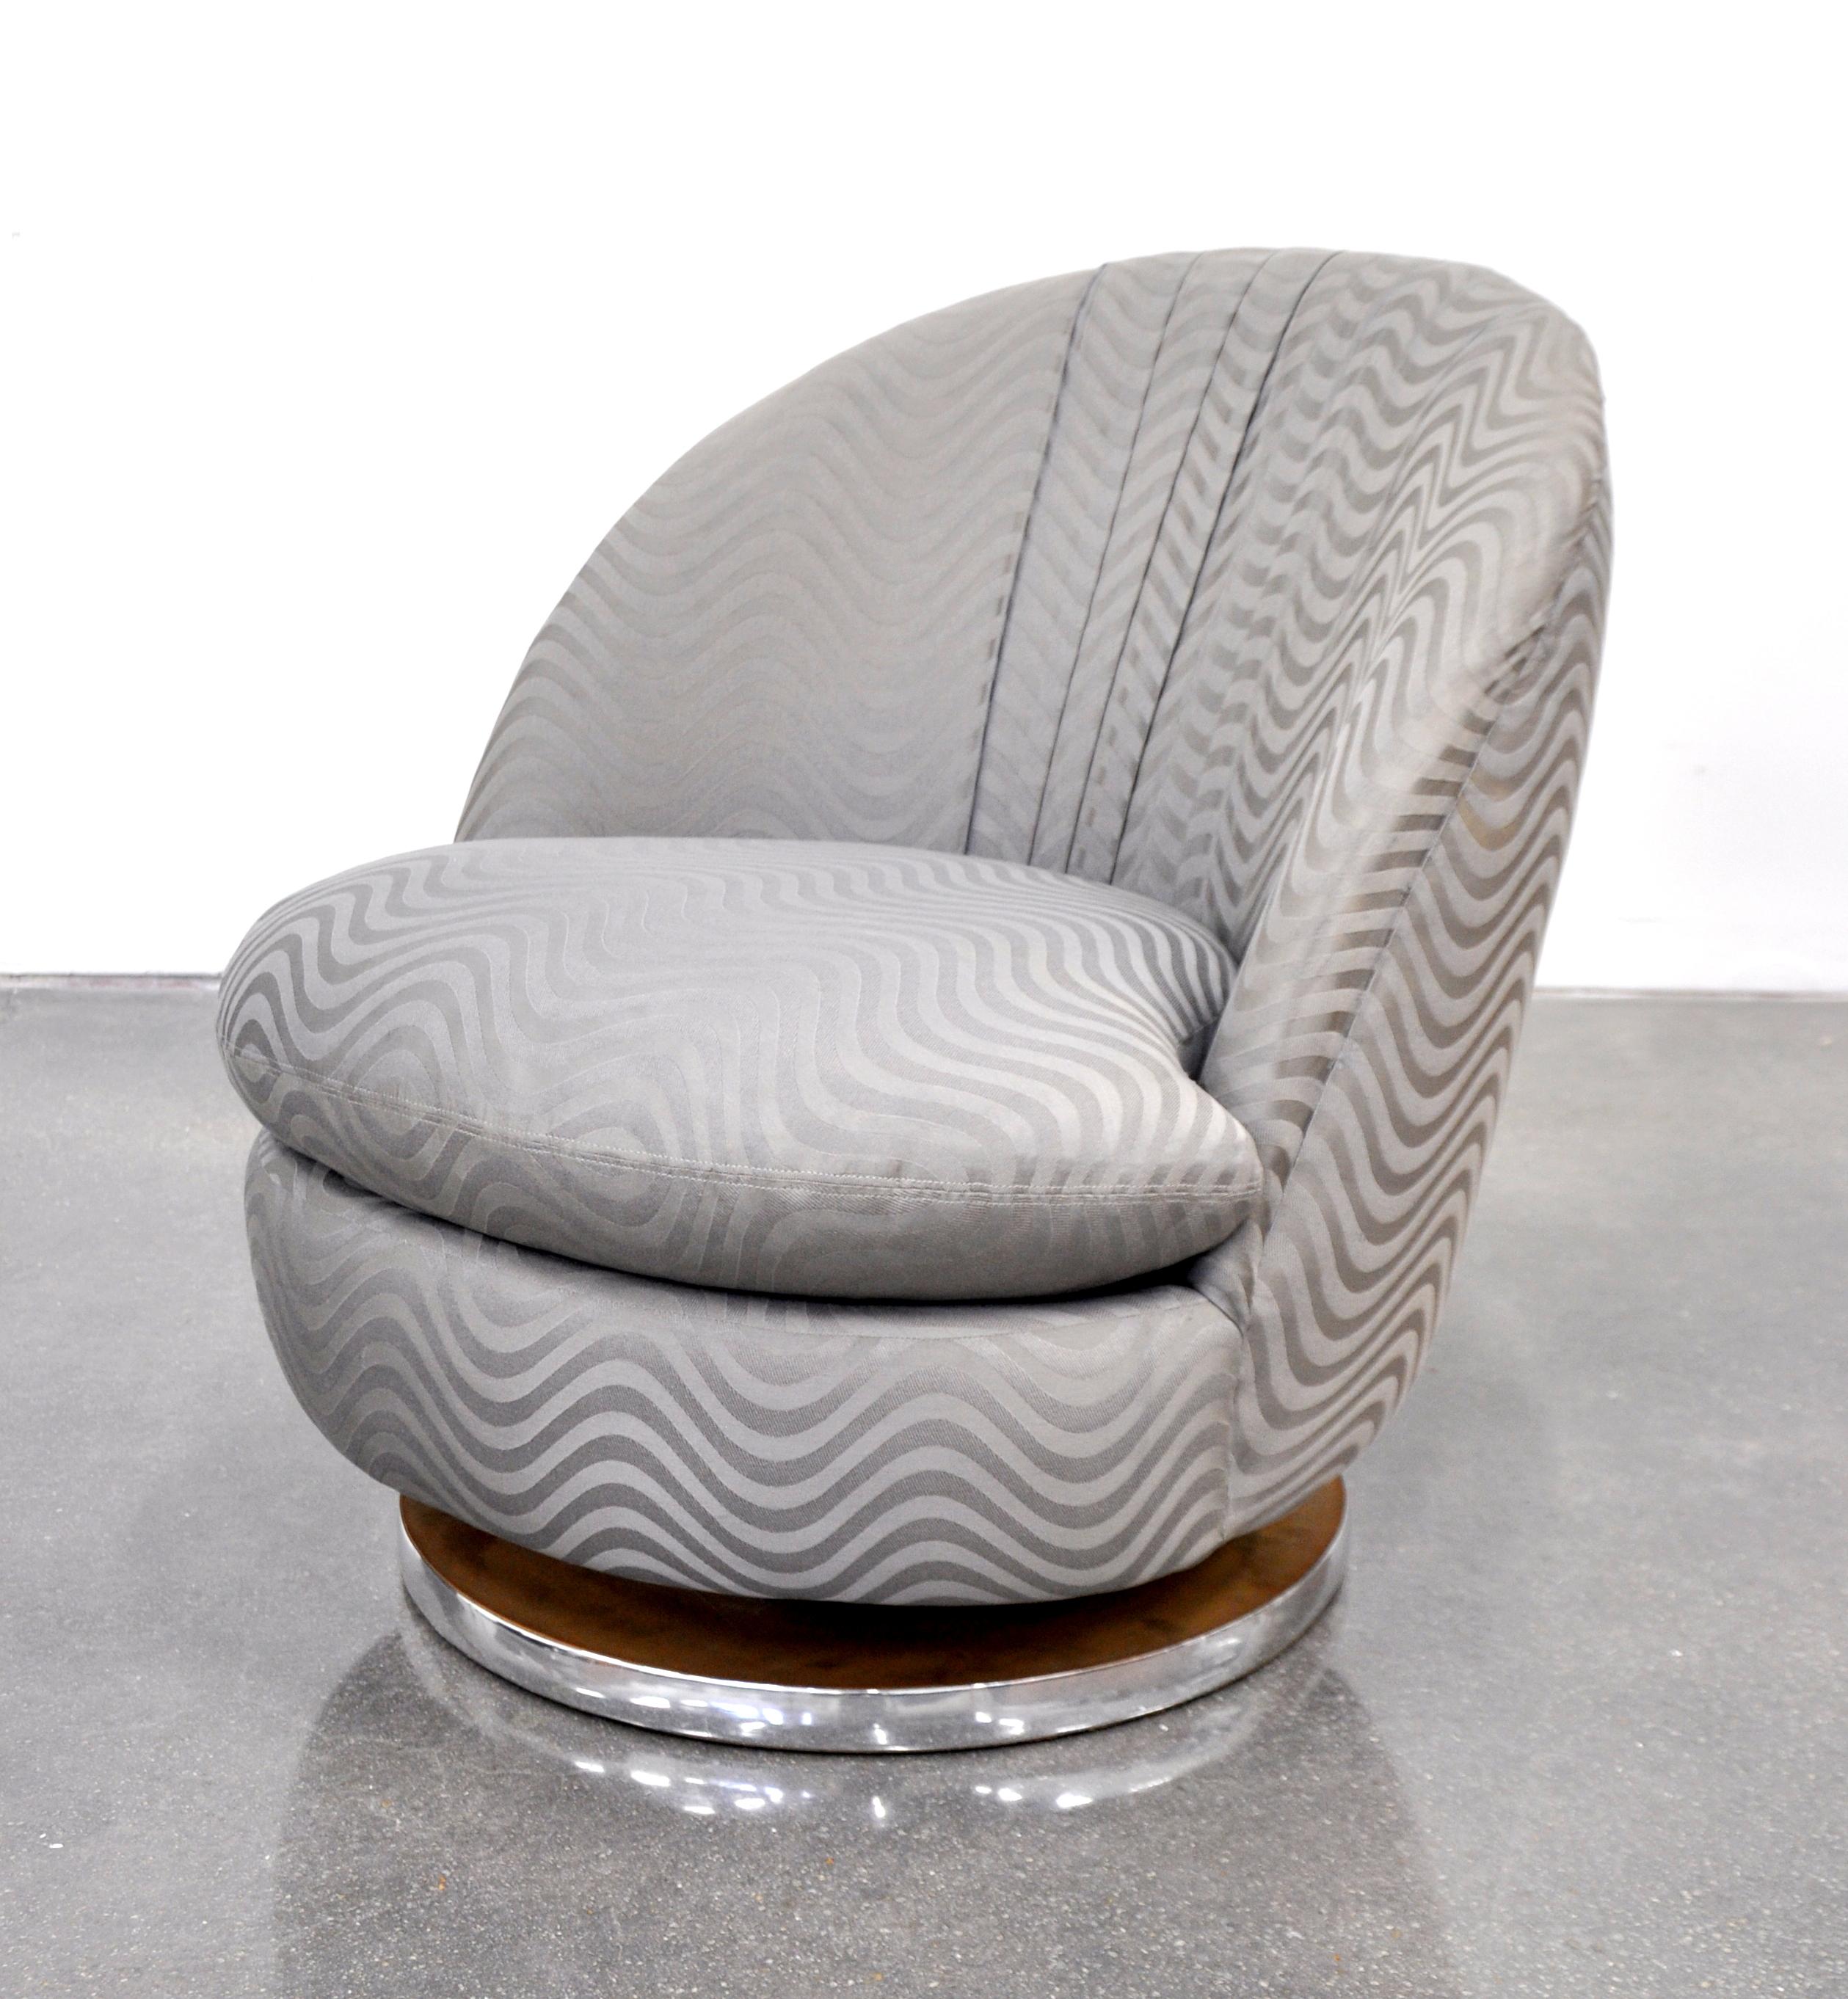 A vintage Mid-Century Modern taupe grey and silver barrel back rocking chair, featuring a chrome accented base with tilting and swiveling mechanism, and original upholstery. An extremely comfortable clam shell shaped slipper chair designed by Milo